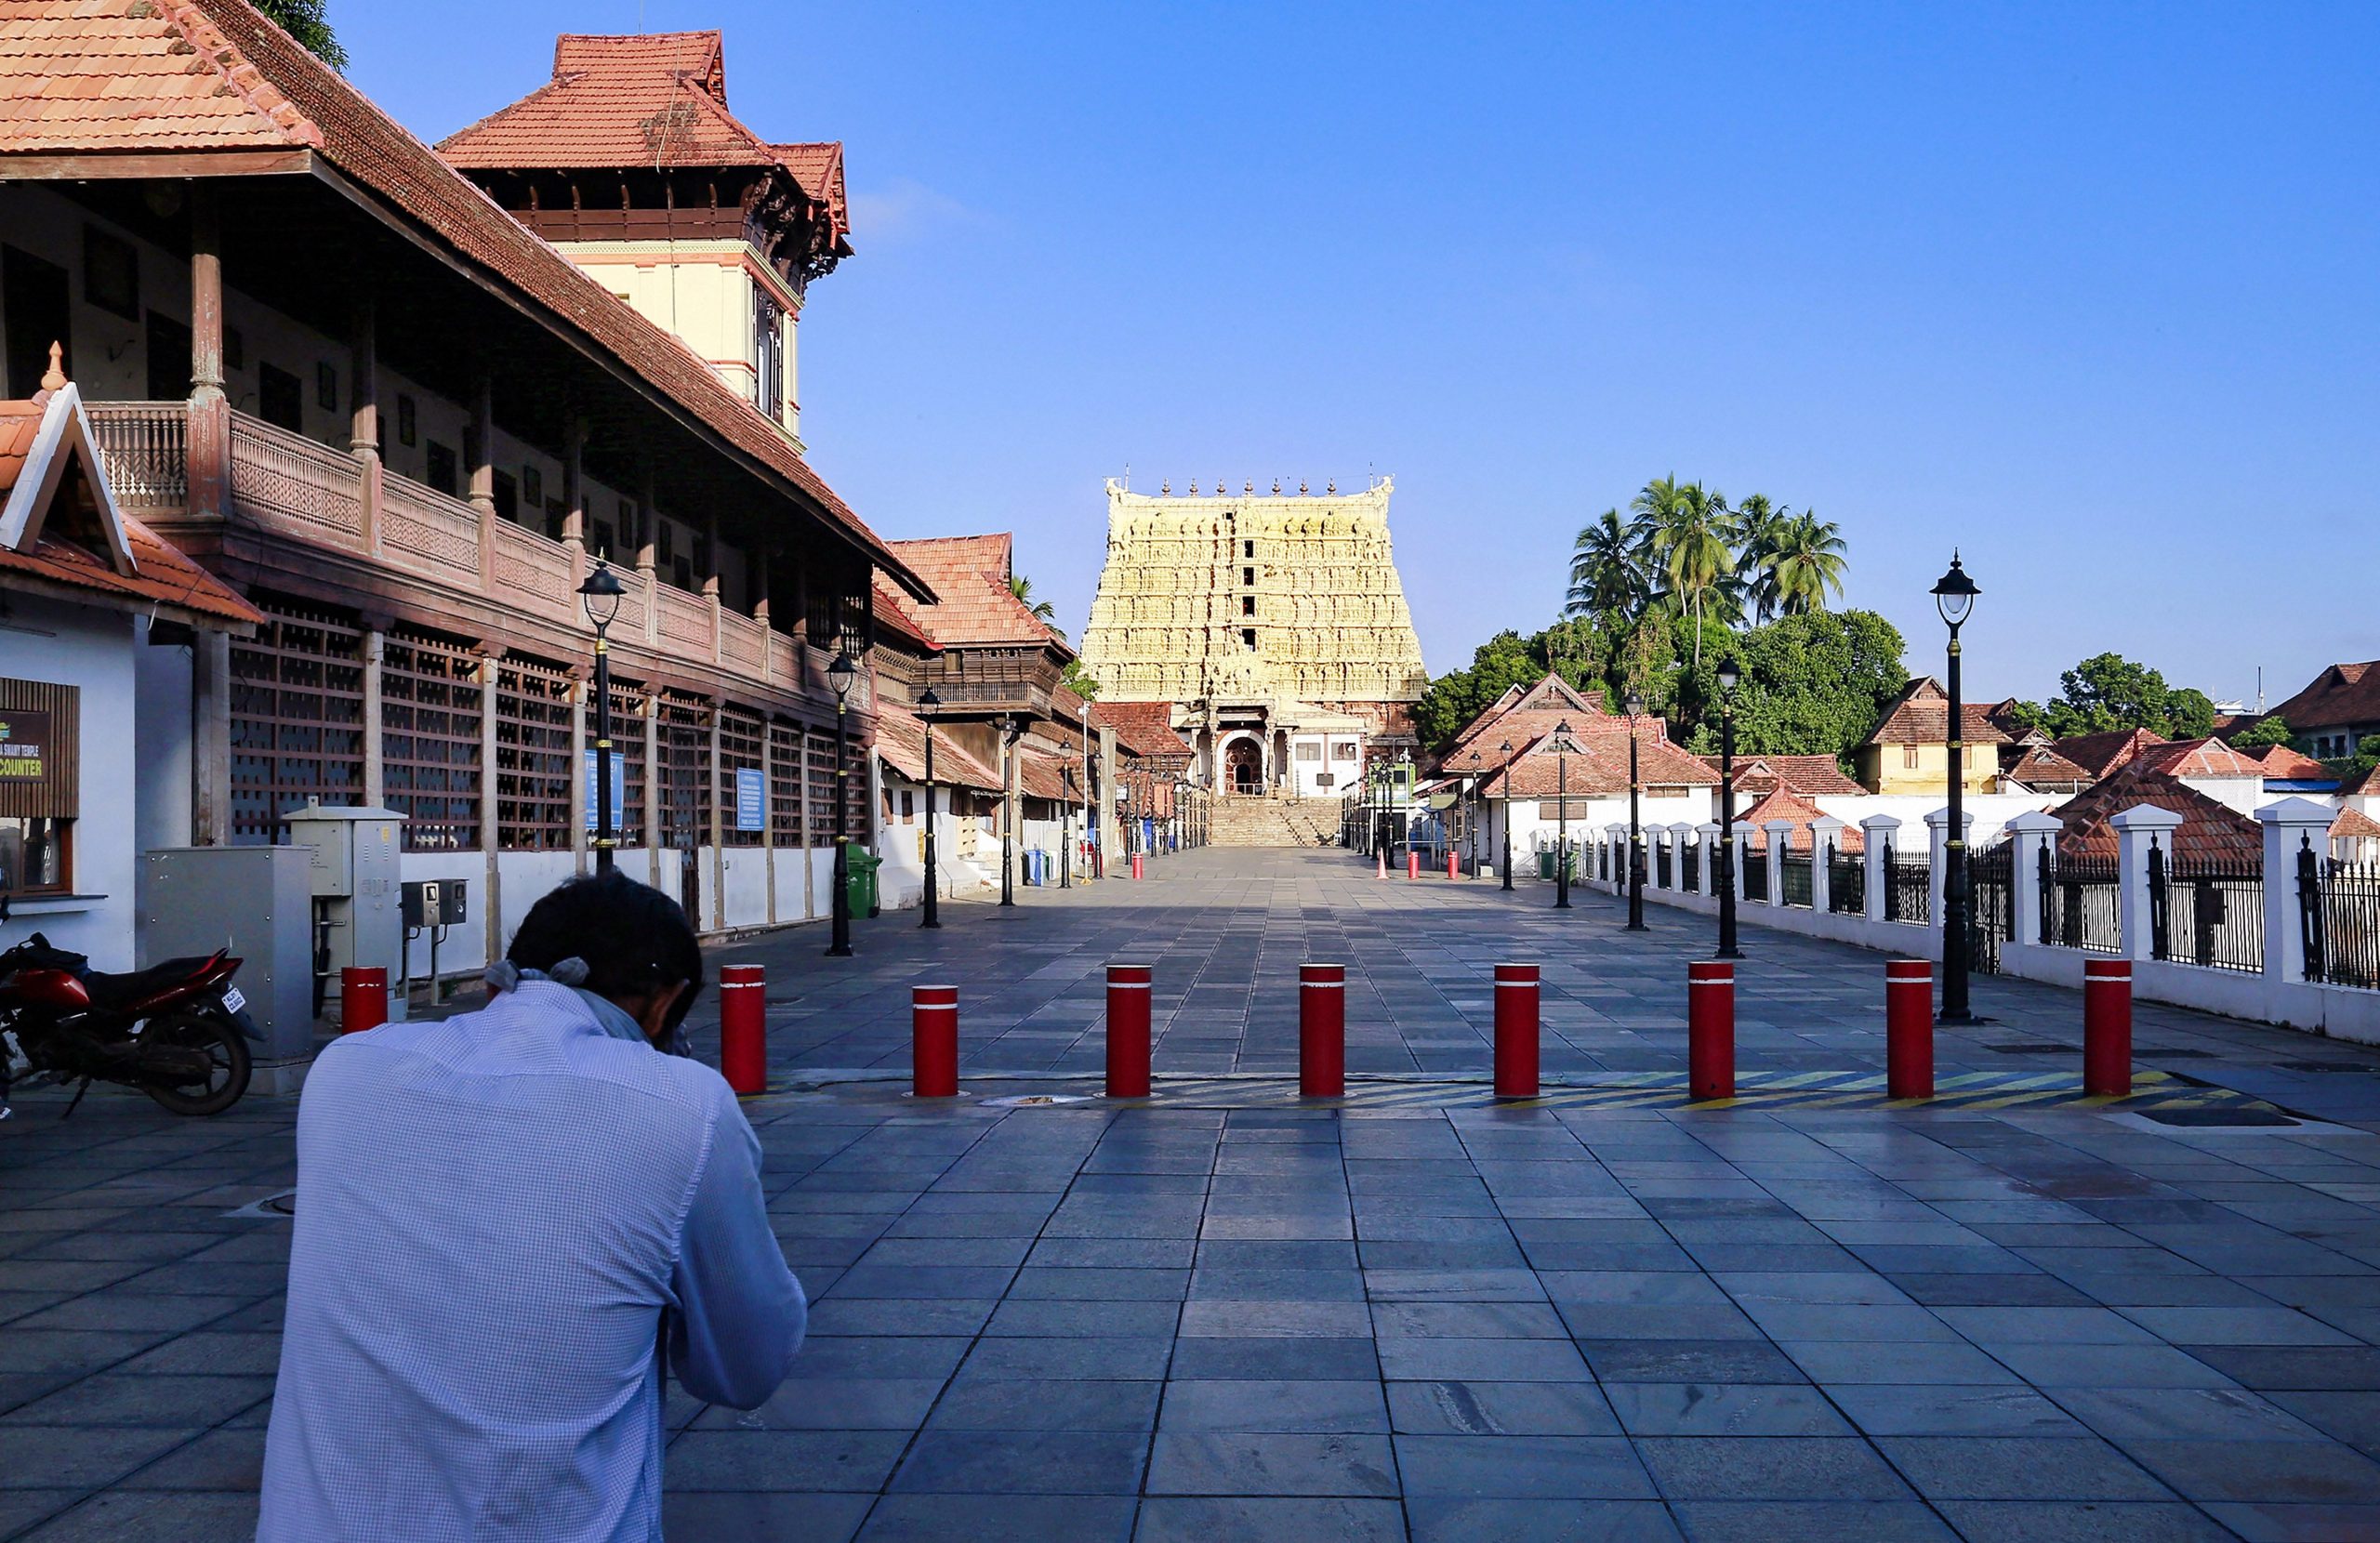 Royals to run Padmanabhaswamy temple, rules SC. Some unanswered questions